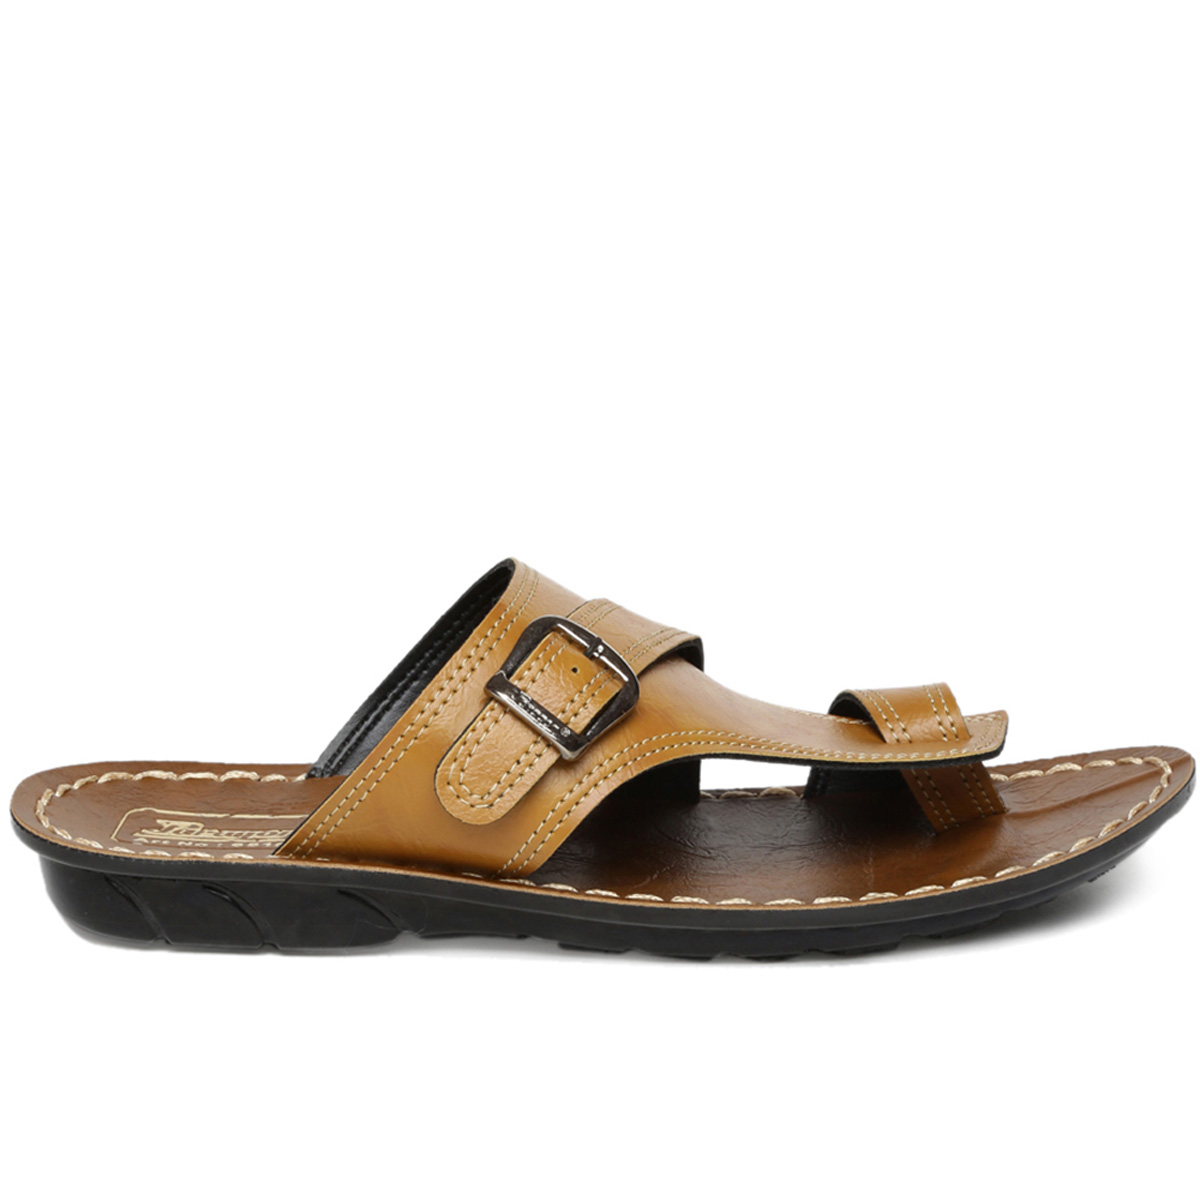 Buy Paragon Men'S Formal Tan Slippers Online @ ₹299 from ShopClues